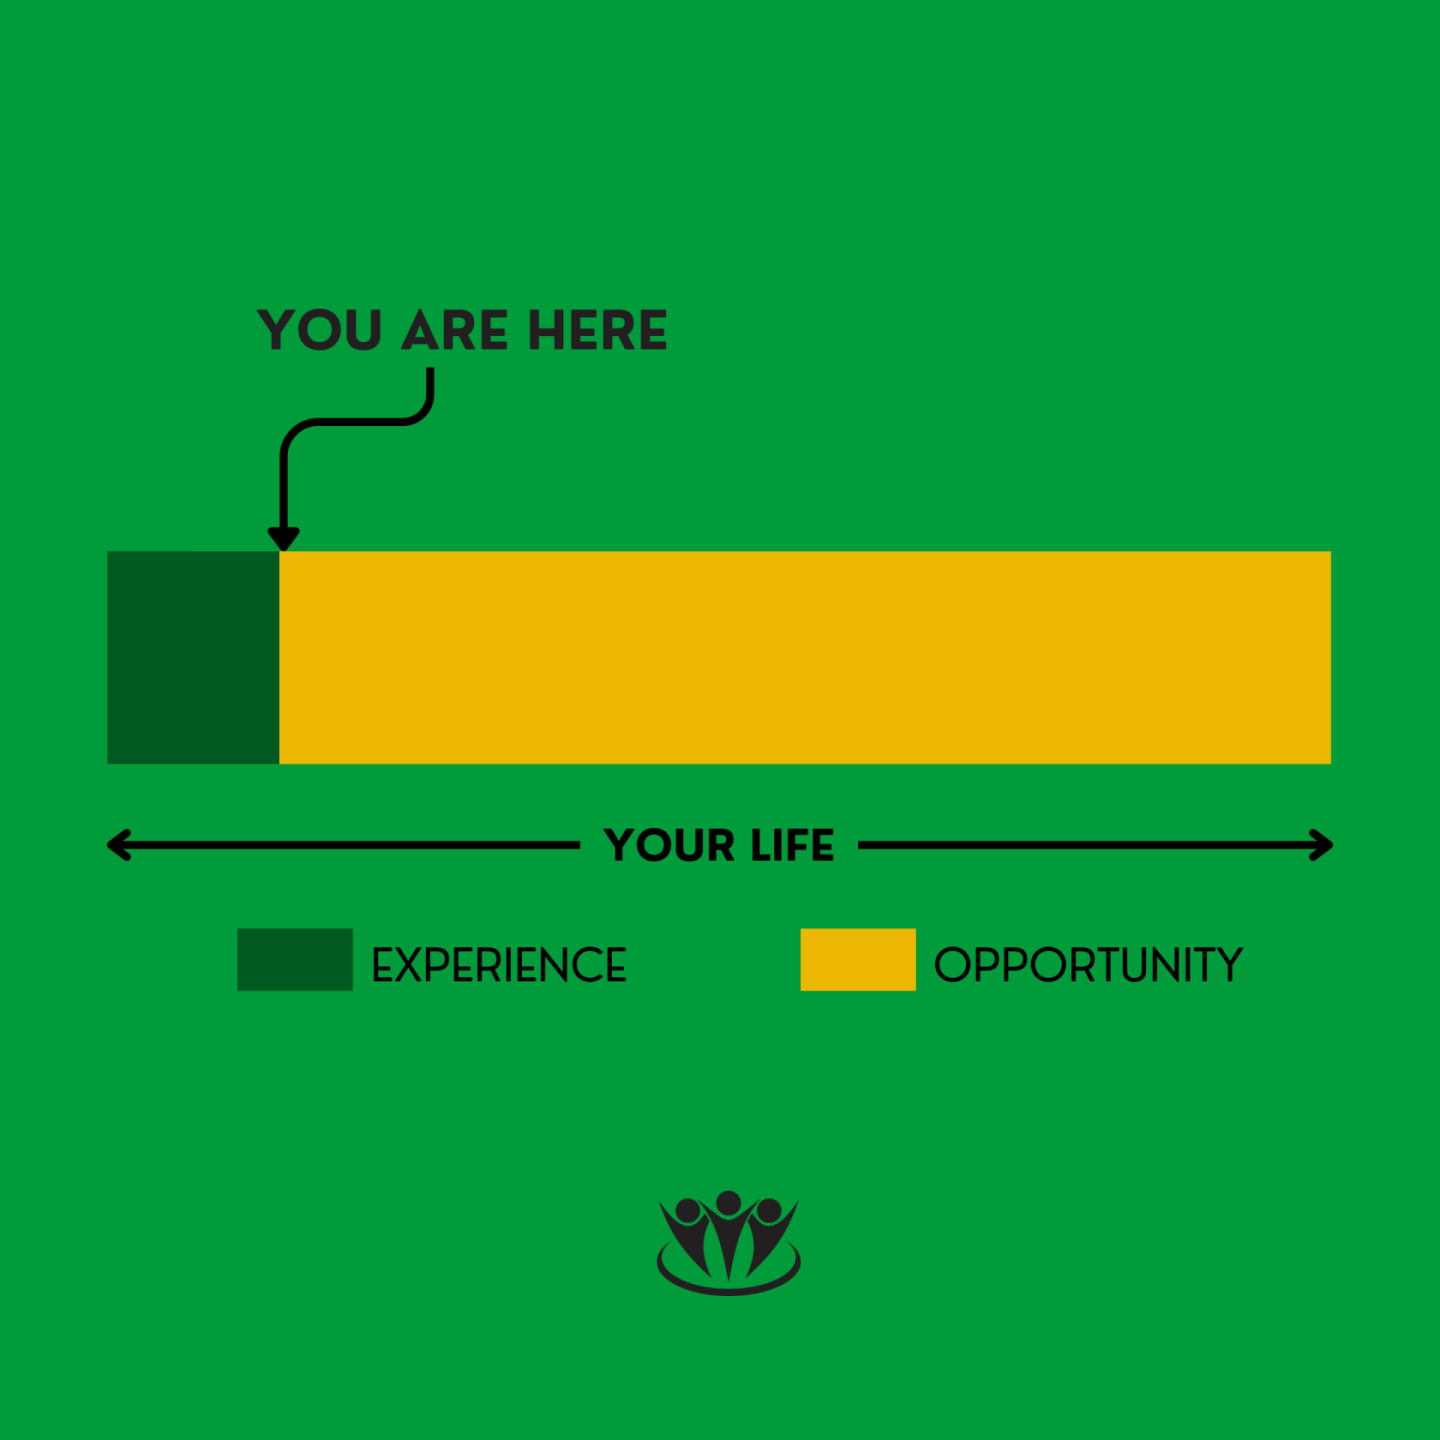 A bar chart on a green background with yellow and green bars representing data.